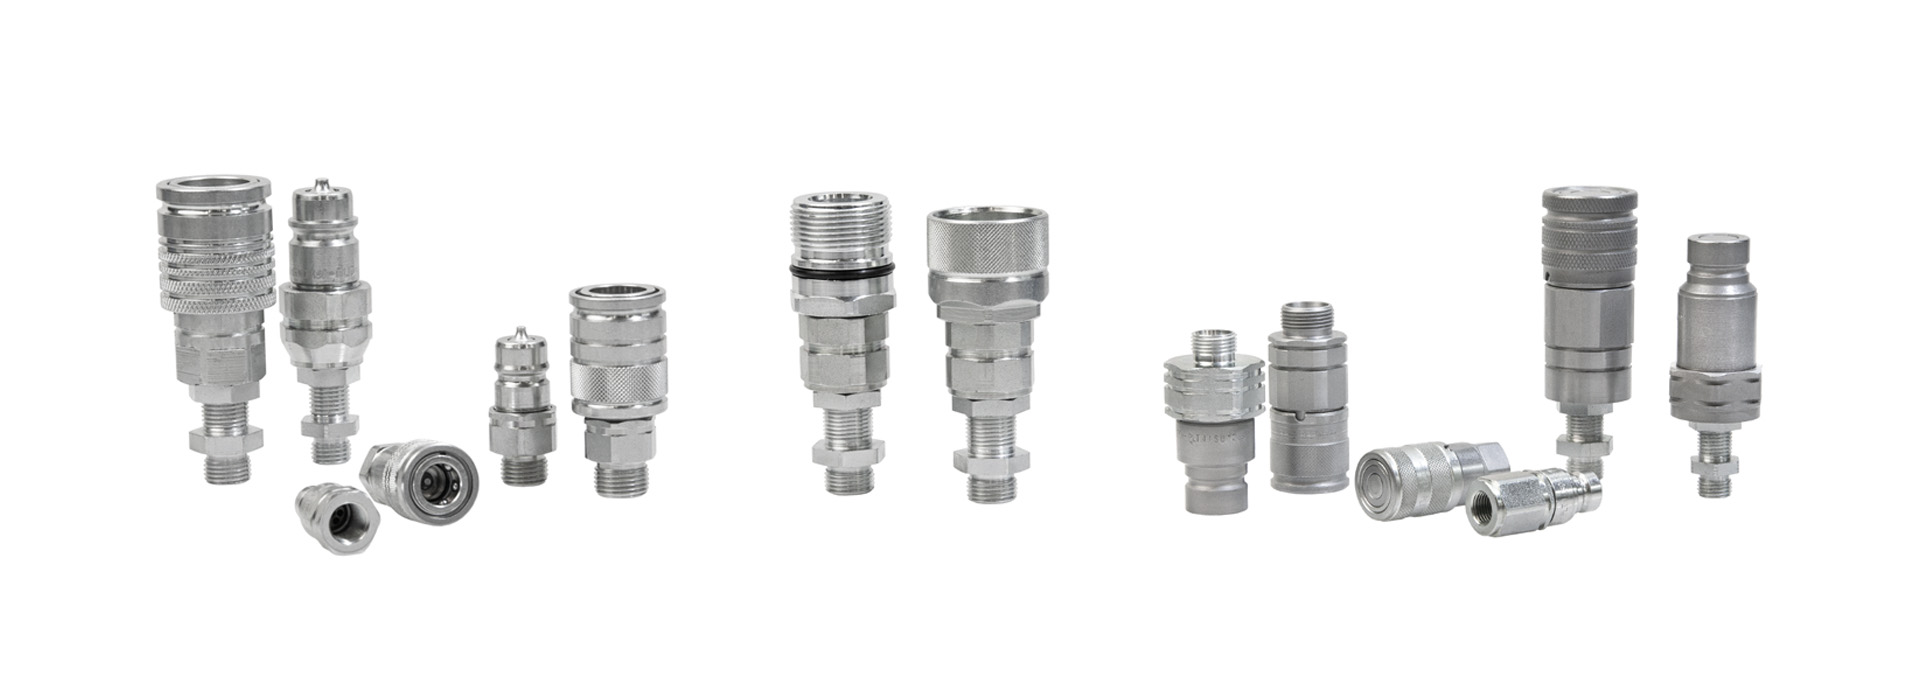 Different hose couplings